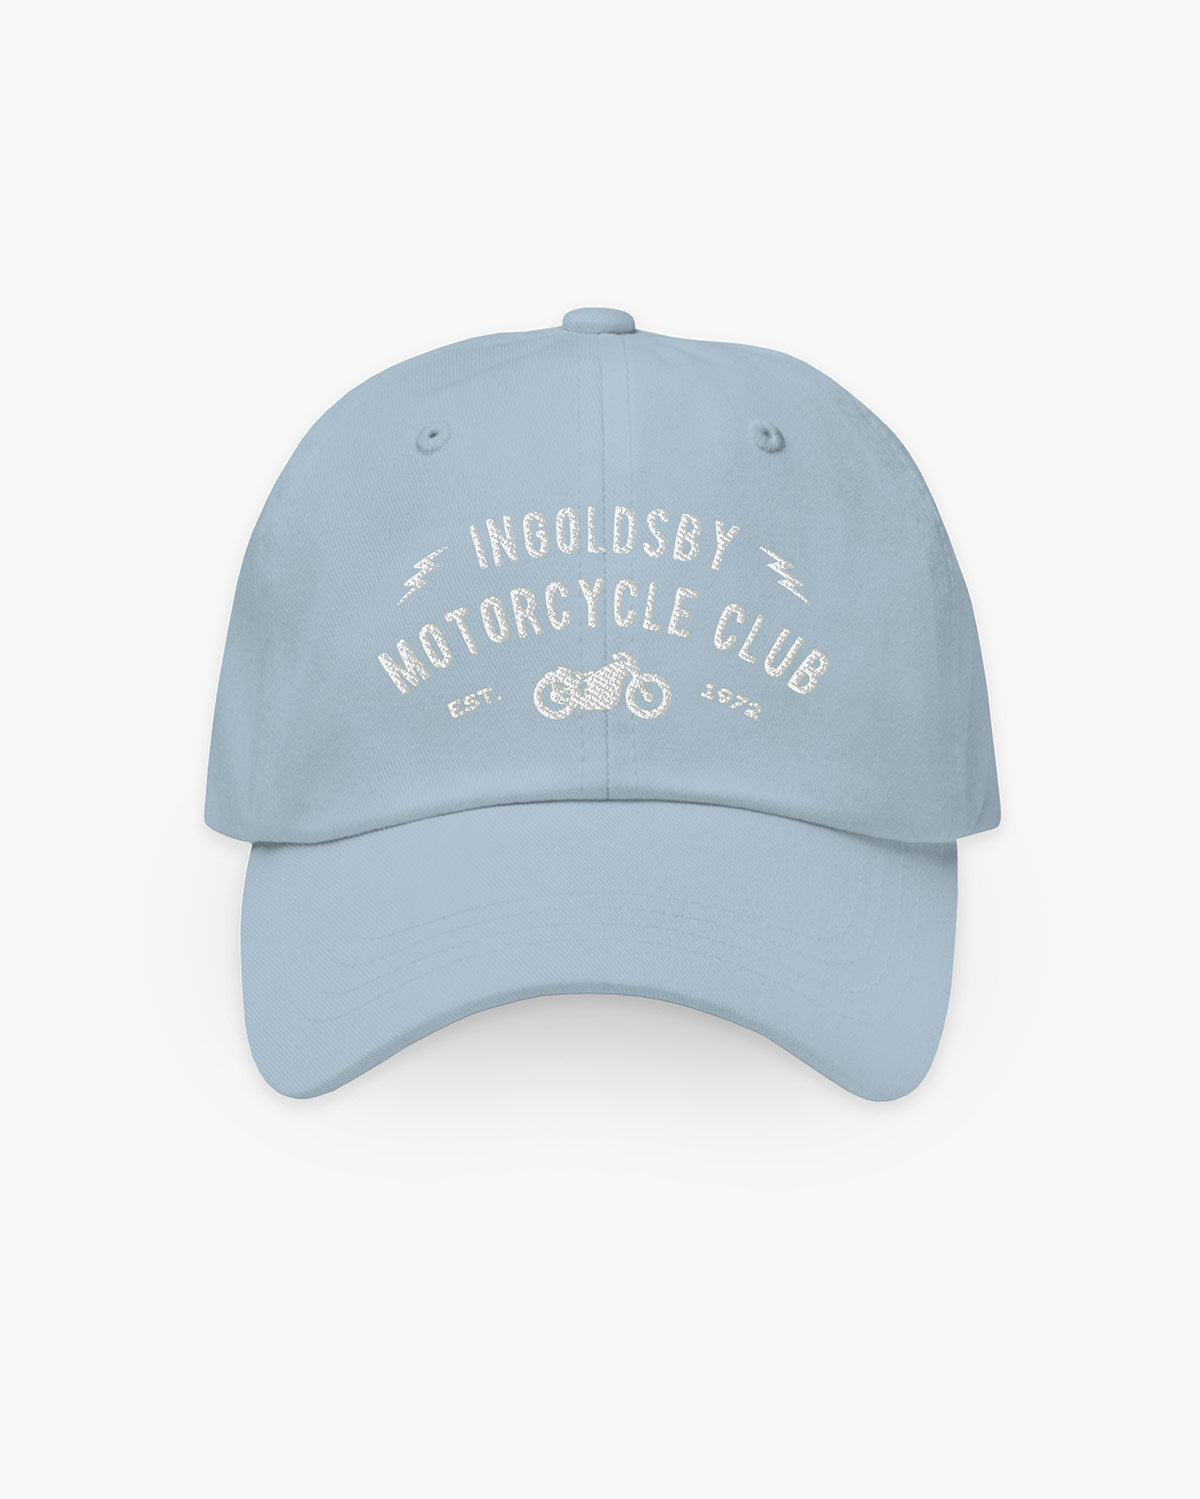 Motorcycle Club - Ingoldsby - Hat